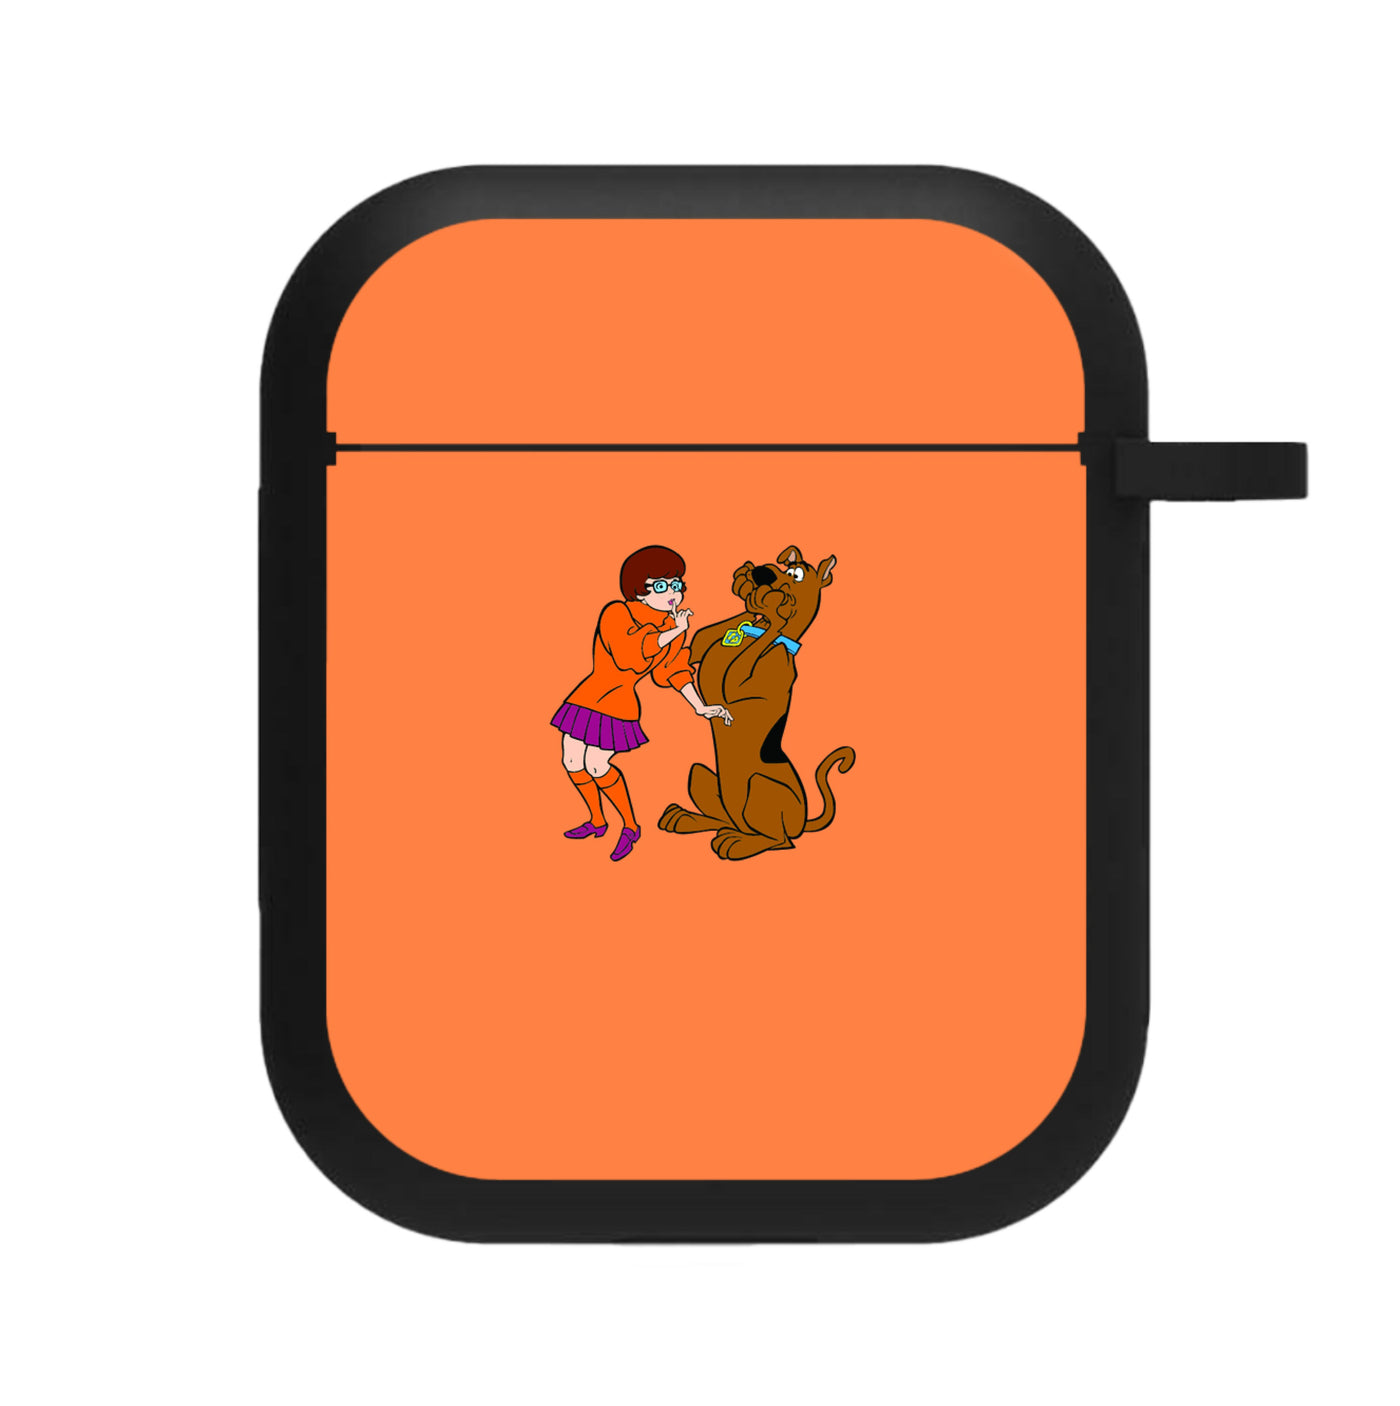 Quite Scooby - Scooby Doo AirPods Case